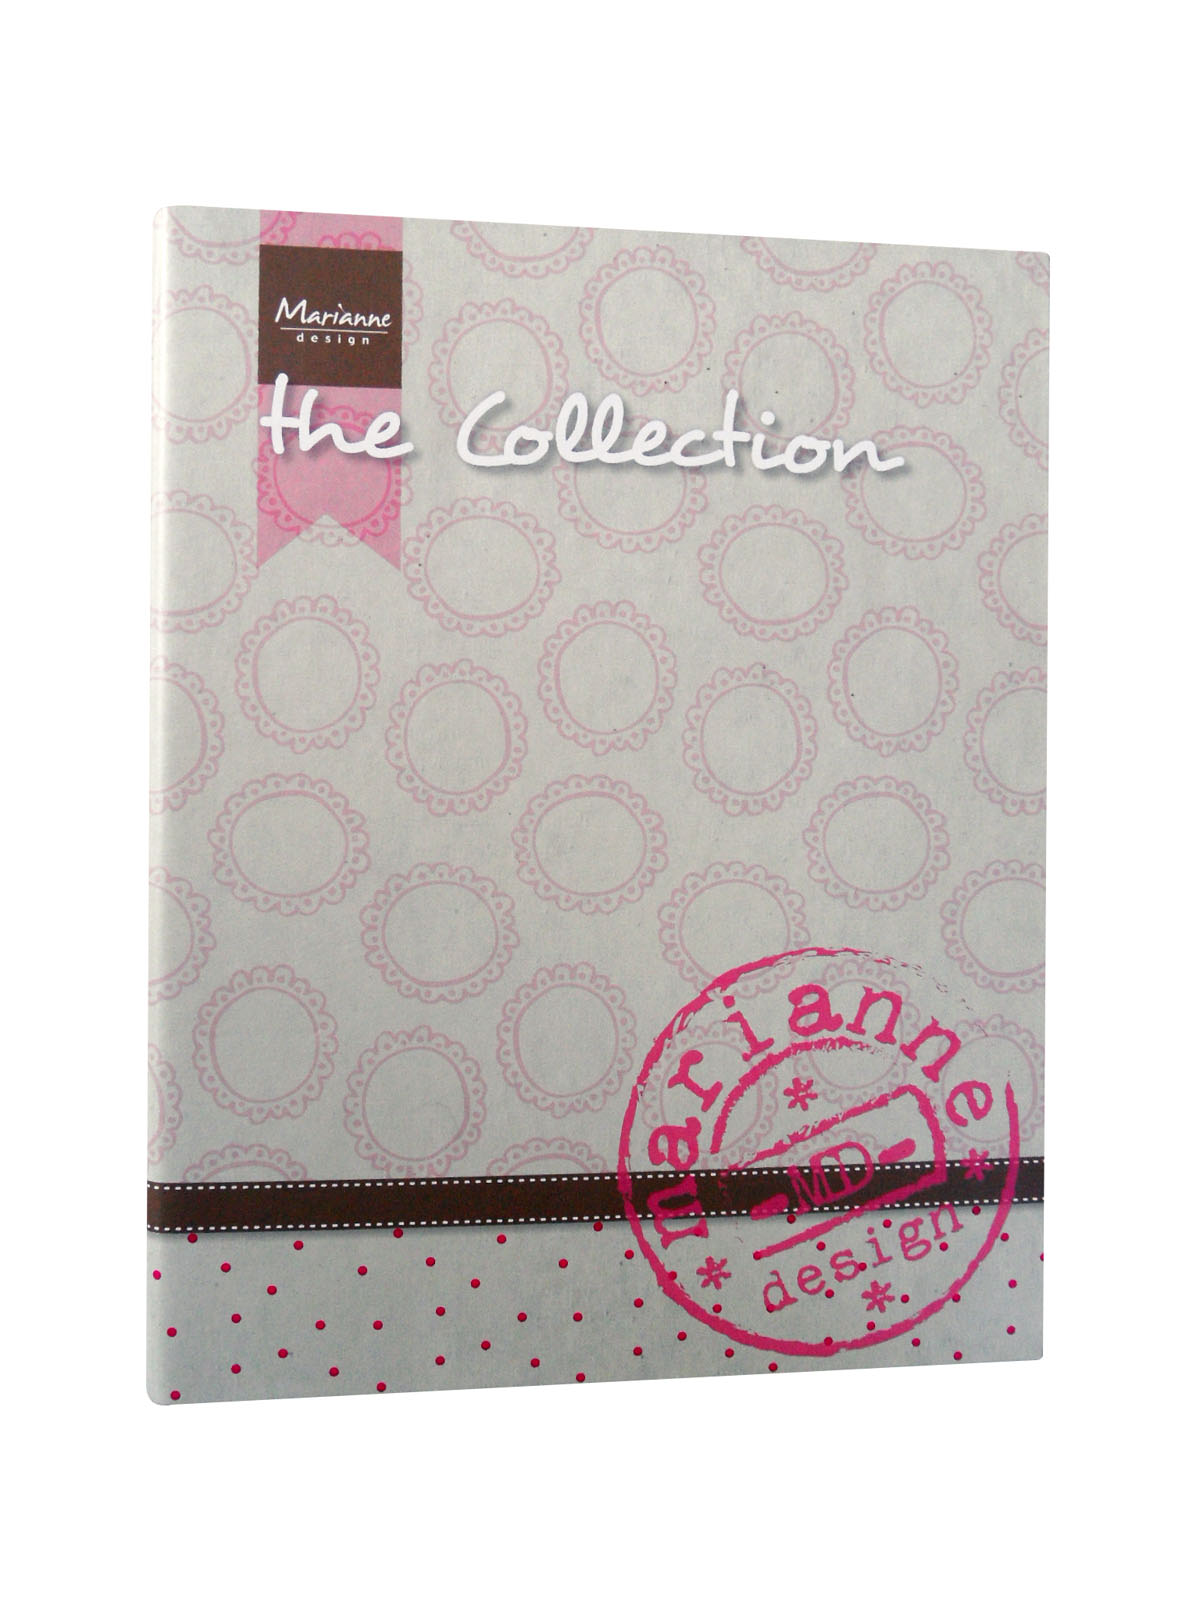 Marianne Design • Binder for the collections